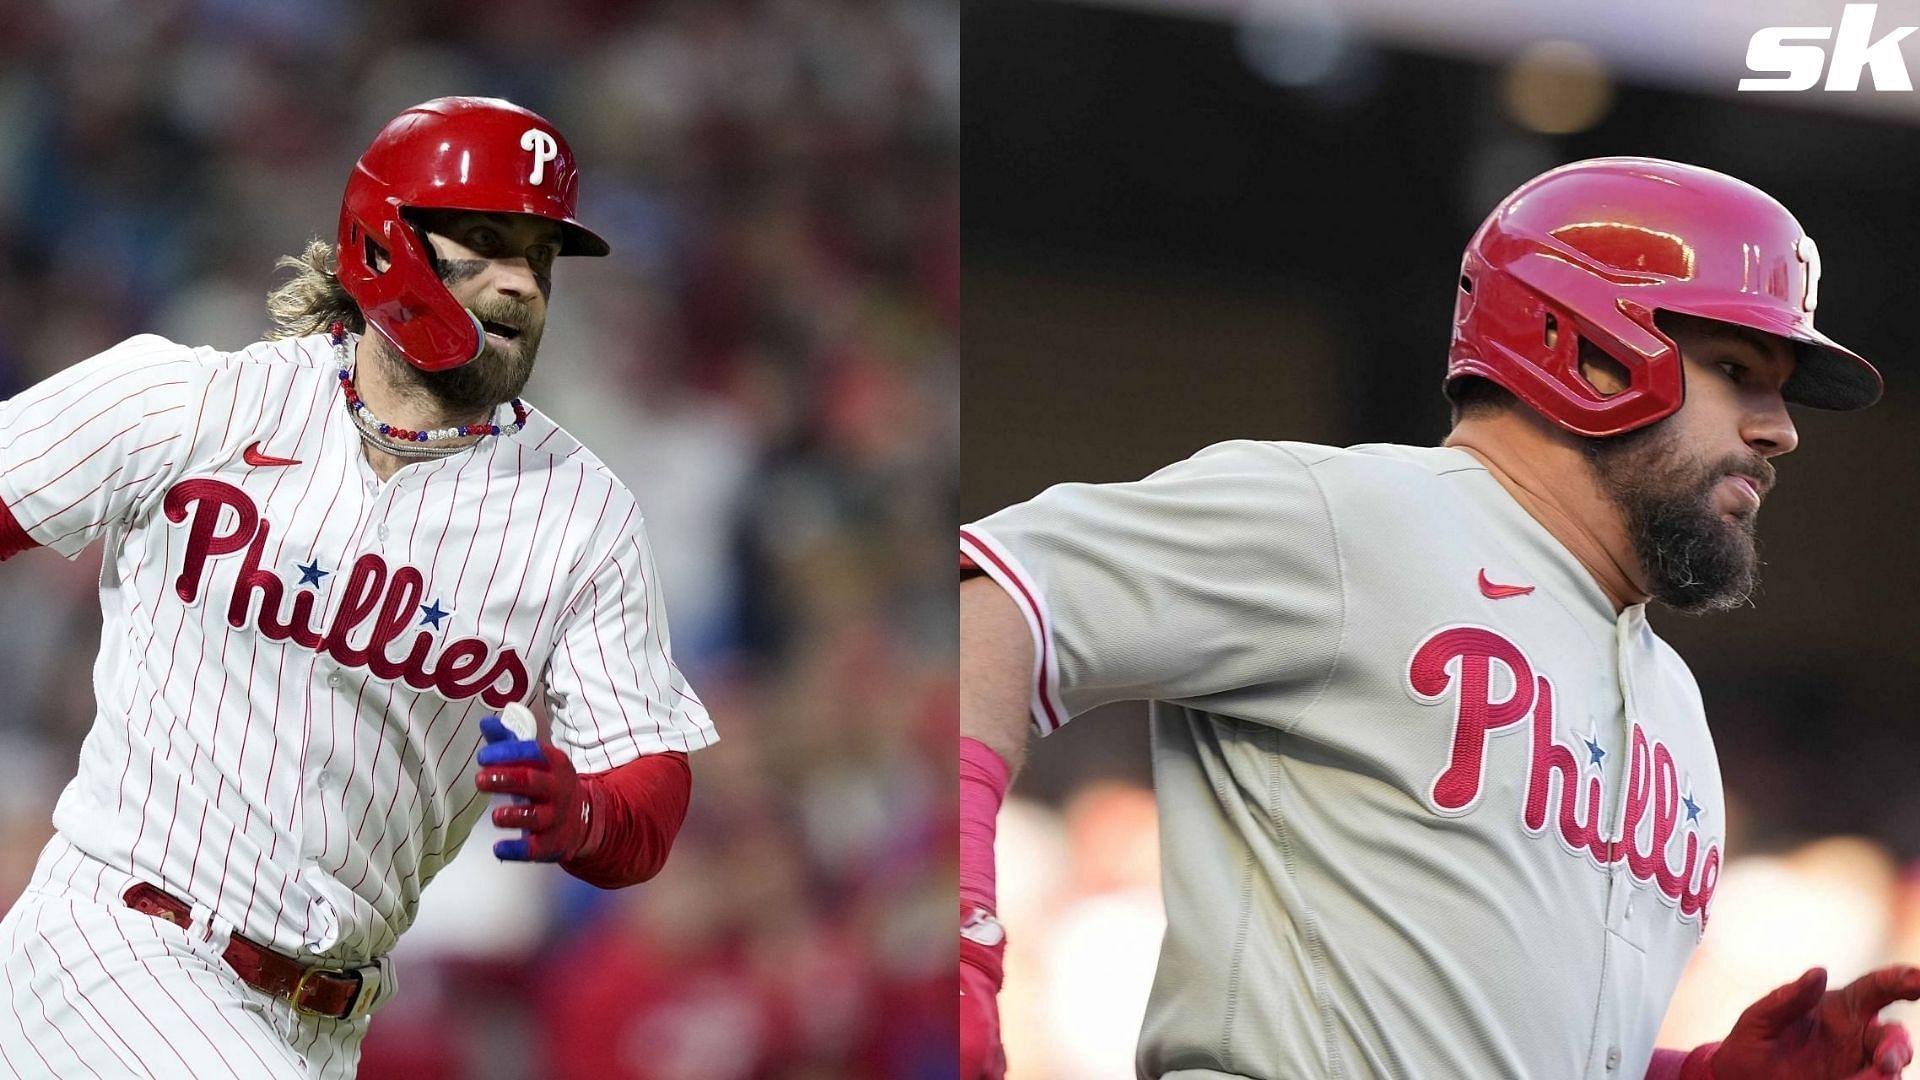 John Clark on X: How about that Phillies 2022 NL Championship